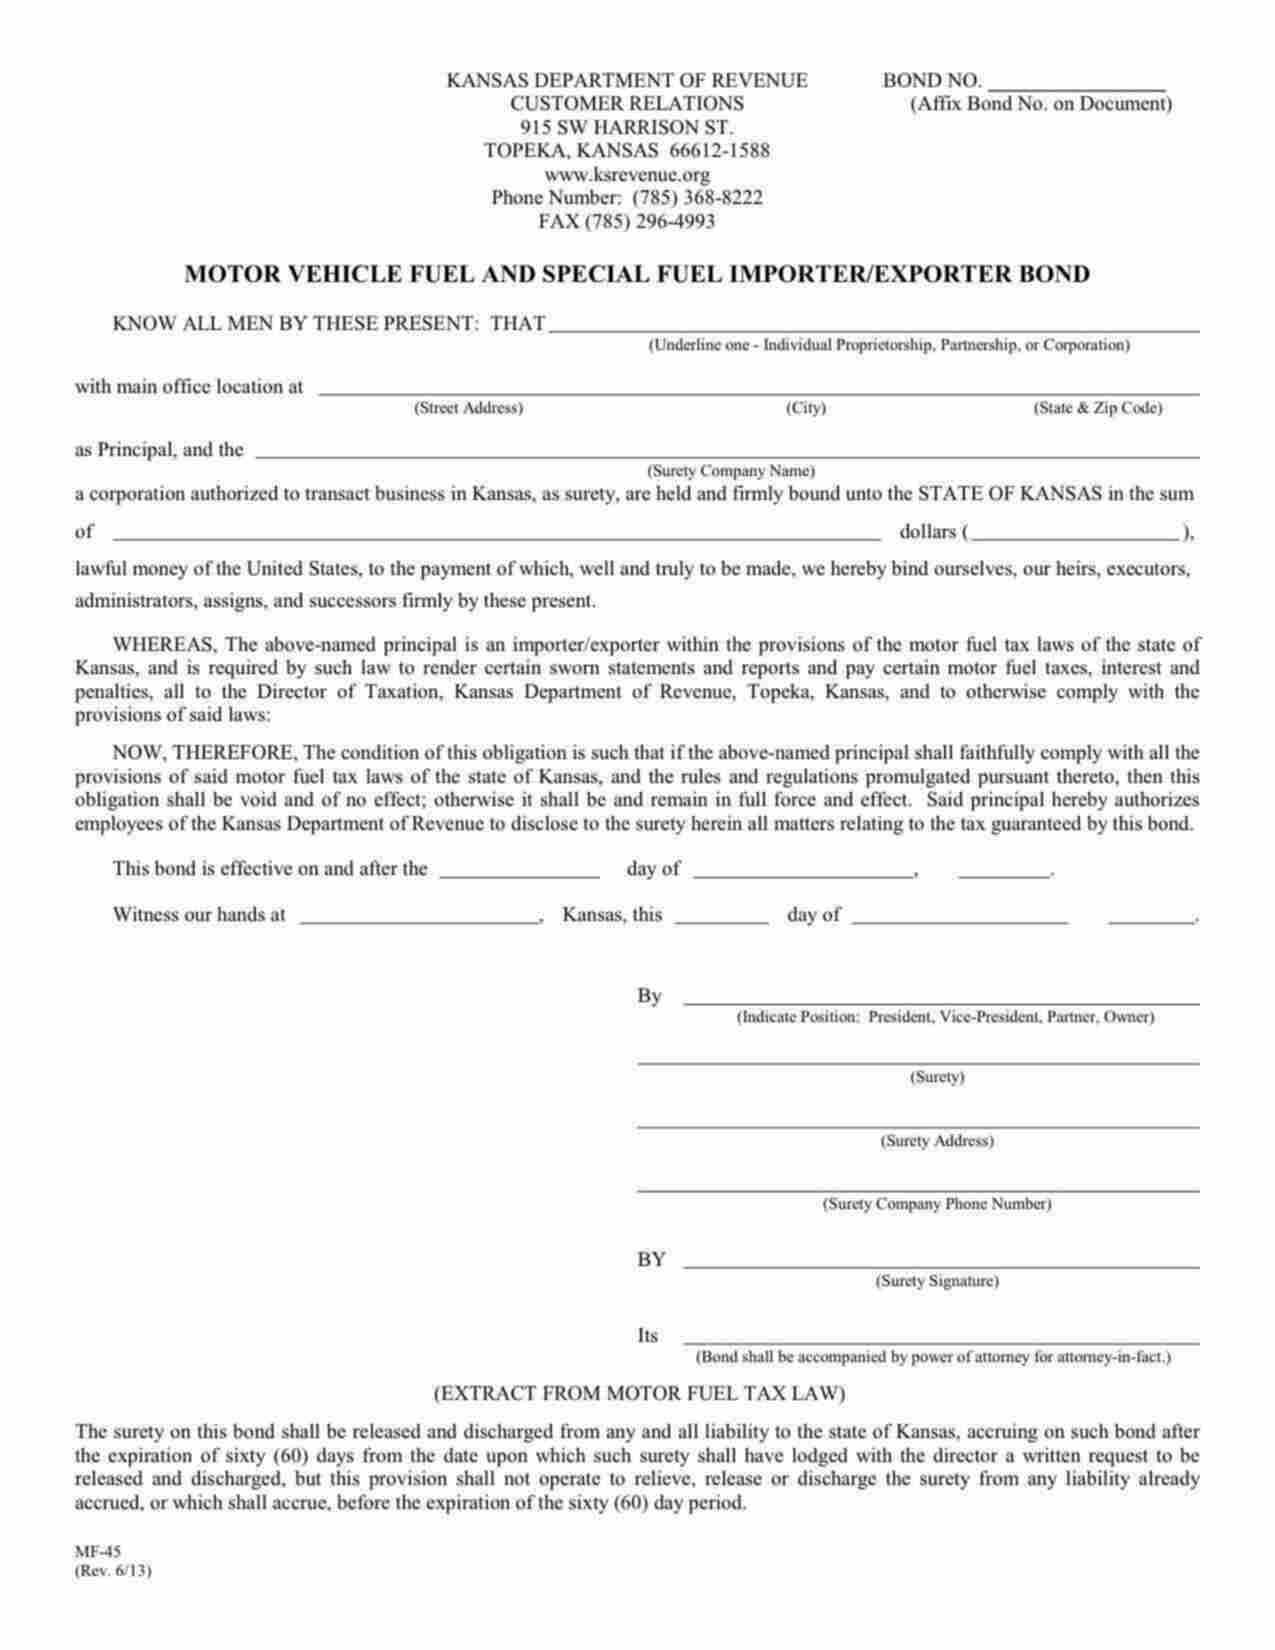 Kansas Motor Vehicle Fuel and Special Fuel Importer/Exporter Bond Form